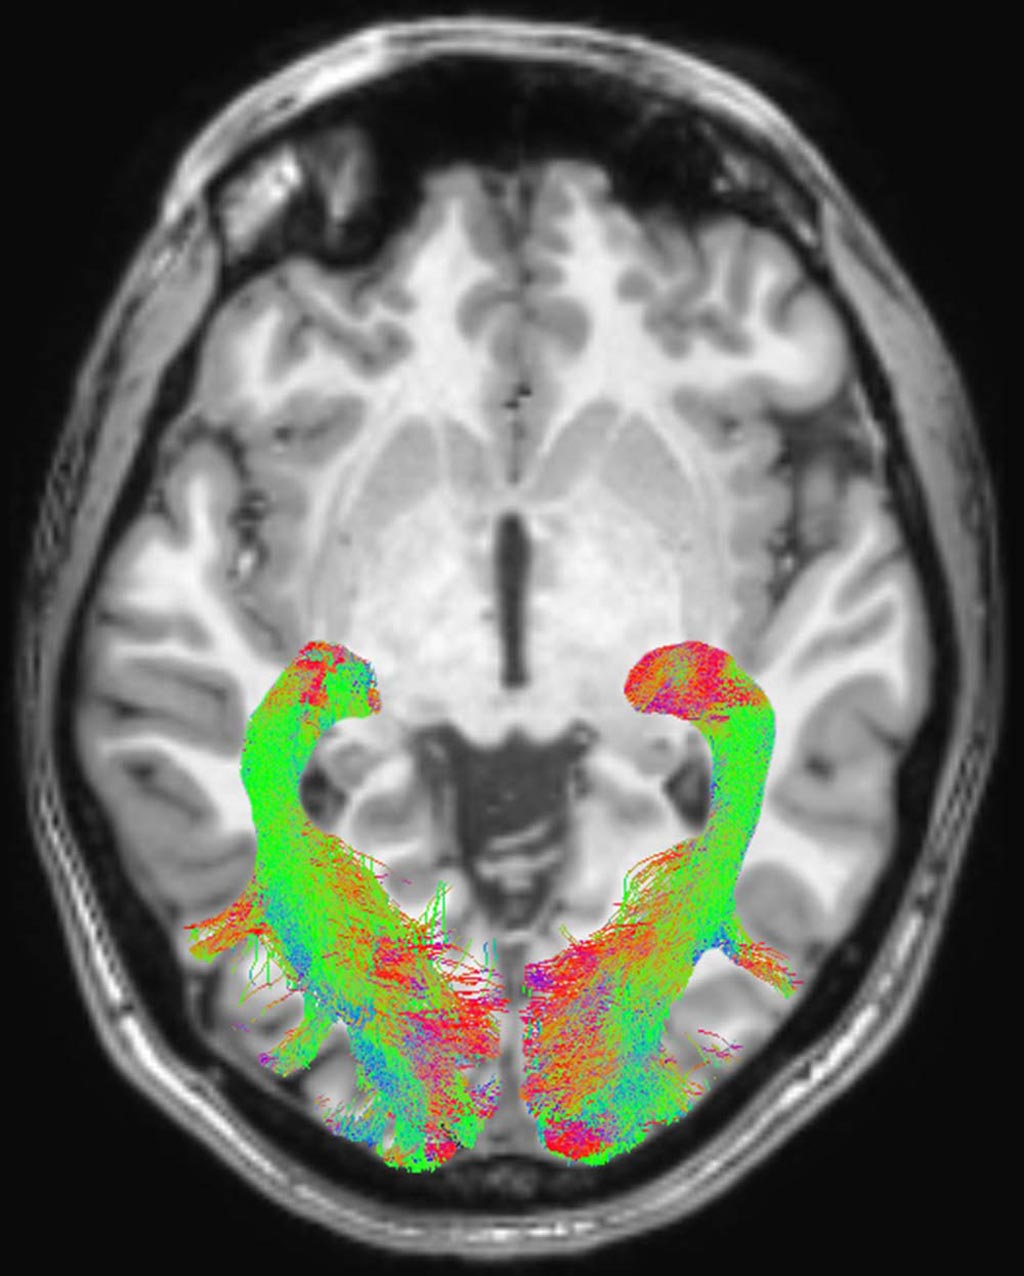 Image: Visual system colored according to tract directionality: red for L to R, green for A to P, and blue for inferior to superior (Photo courtesy of UNISR).